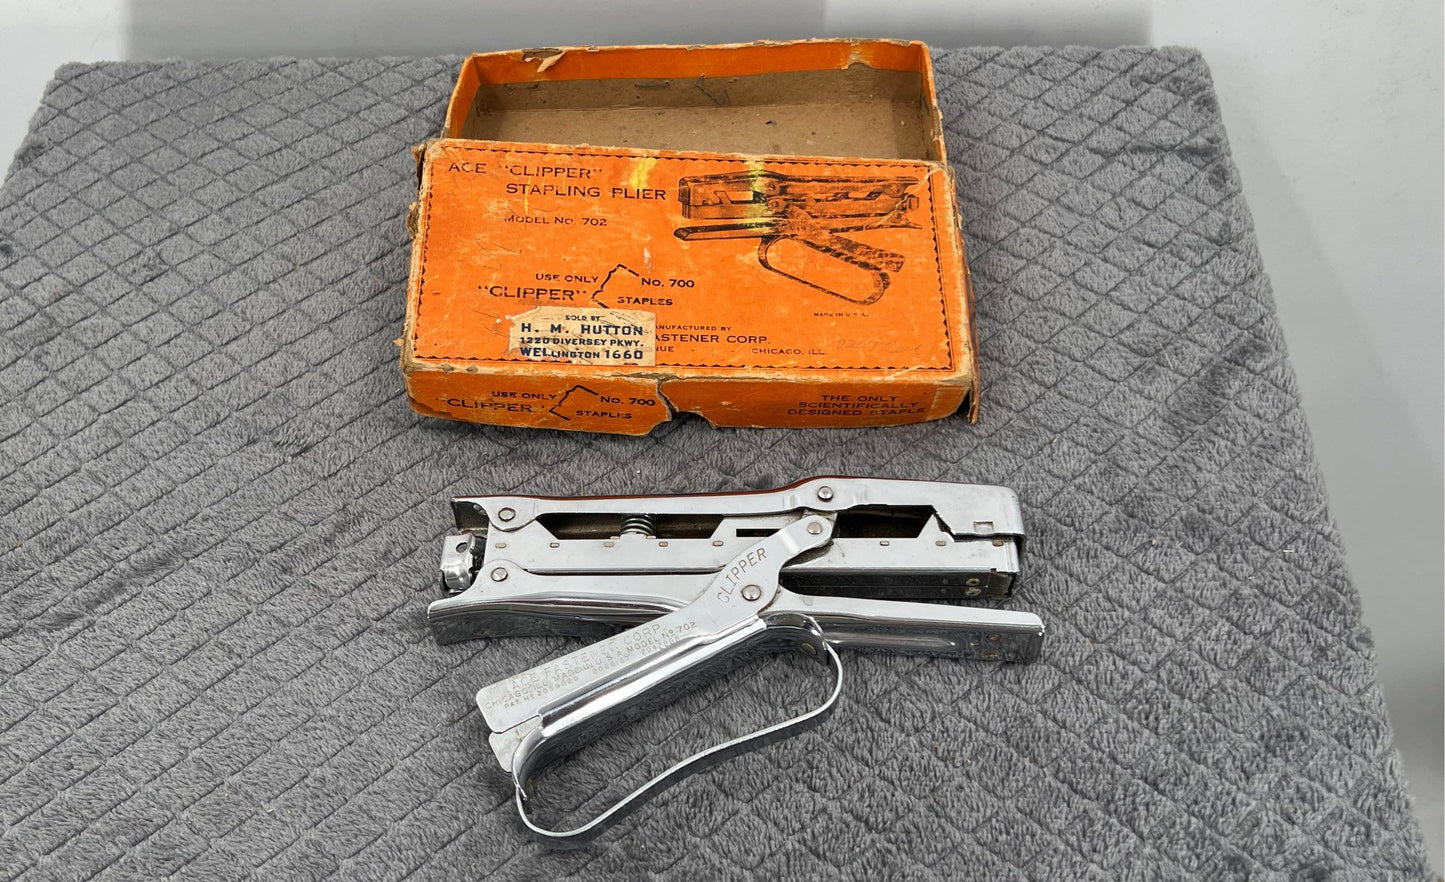 Vintage Ace "Clipper" Stapling Plier Model No. 702 With 2 Boxes Of Staples-USA